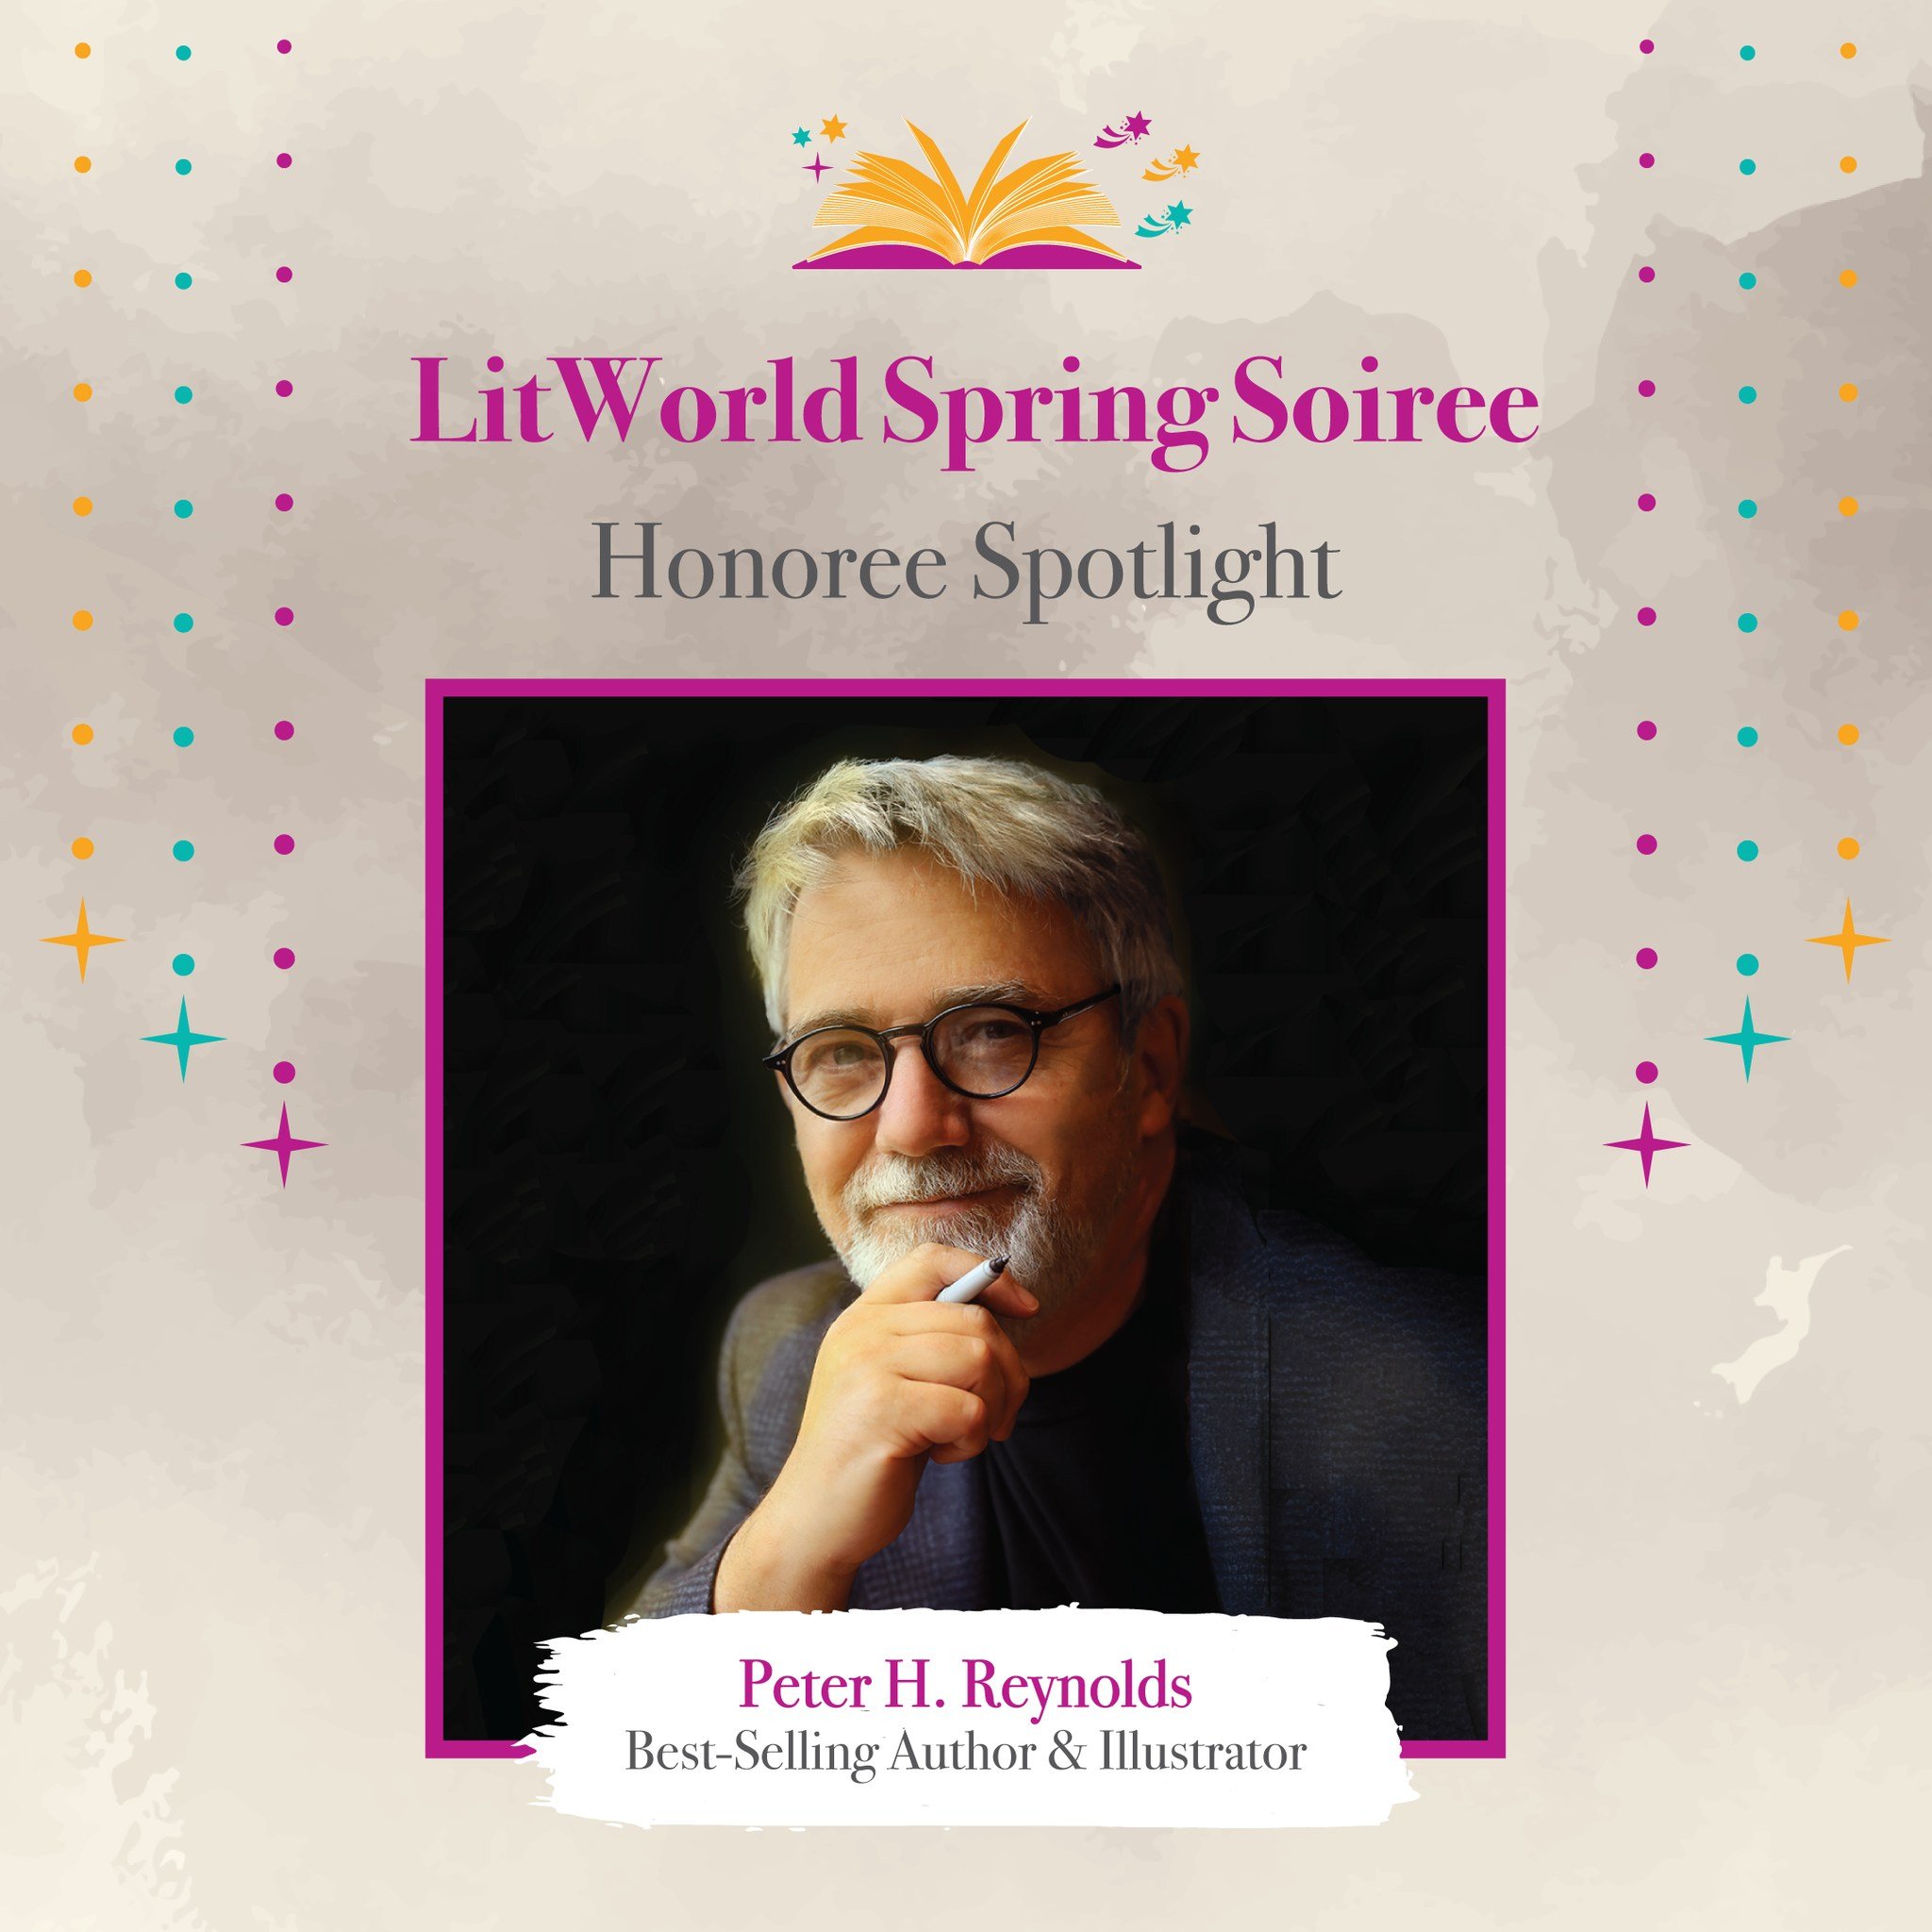 Meet our Spring Soiree Honoree: Peter H. Reynolds (@peterhreynolds) ✨

A cherished friend and supporter of LitWorld, Peter is a celebrated writer, illustrator, and storyteller whose inspiring tales like &quot;The Dot&quot; and &quot;Ish&quot; have le